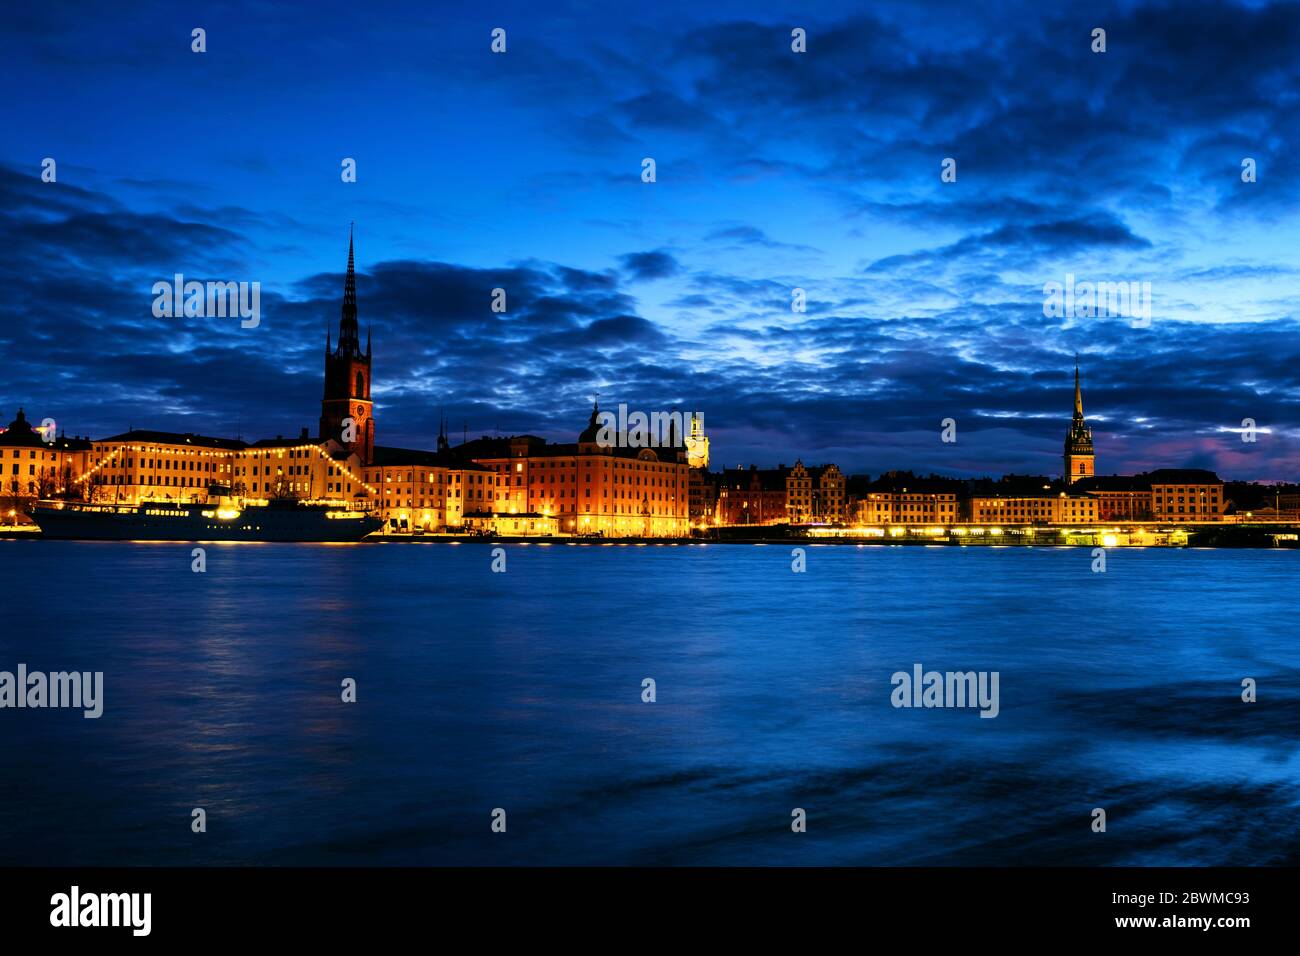 Stockholm, Sweden. View of Gamla Stan in Stockholm, Sweden with landmarks like Riddarholm Church during the night. View of old buildings and car traff Stock Photo